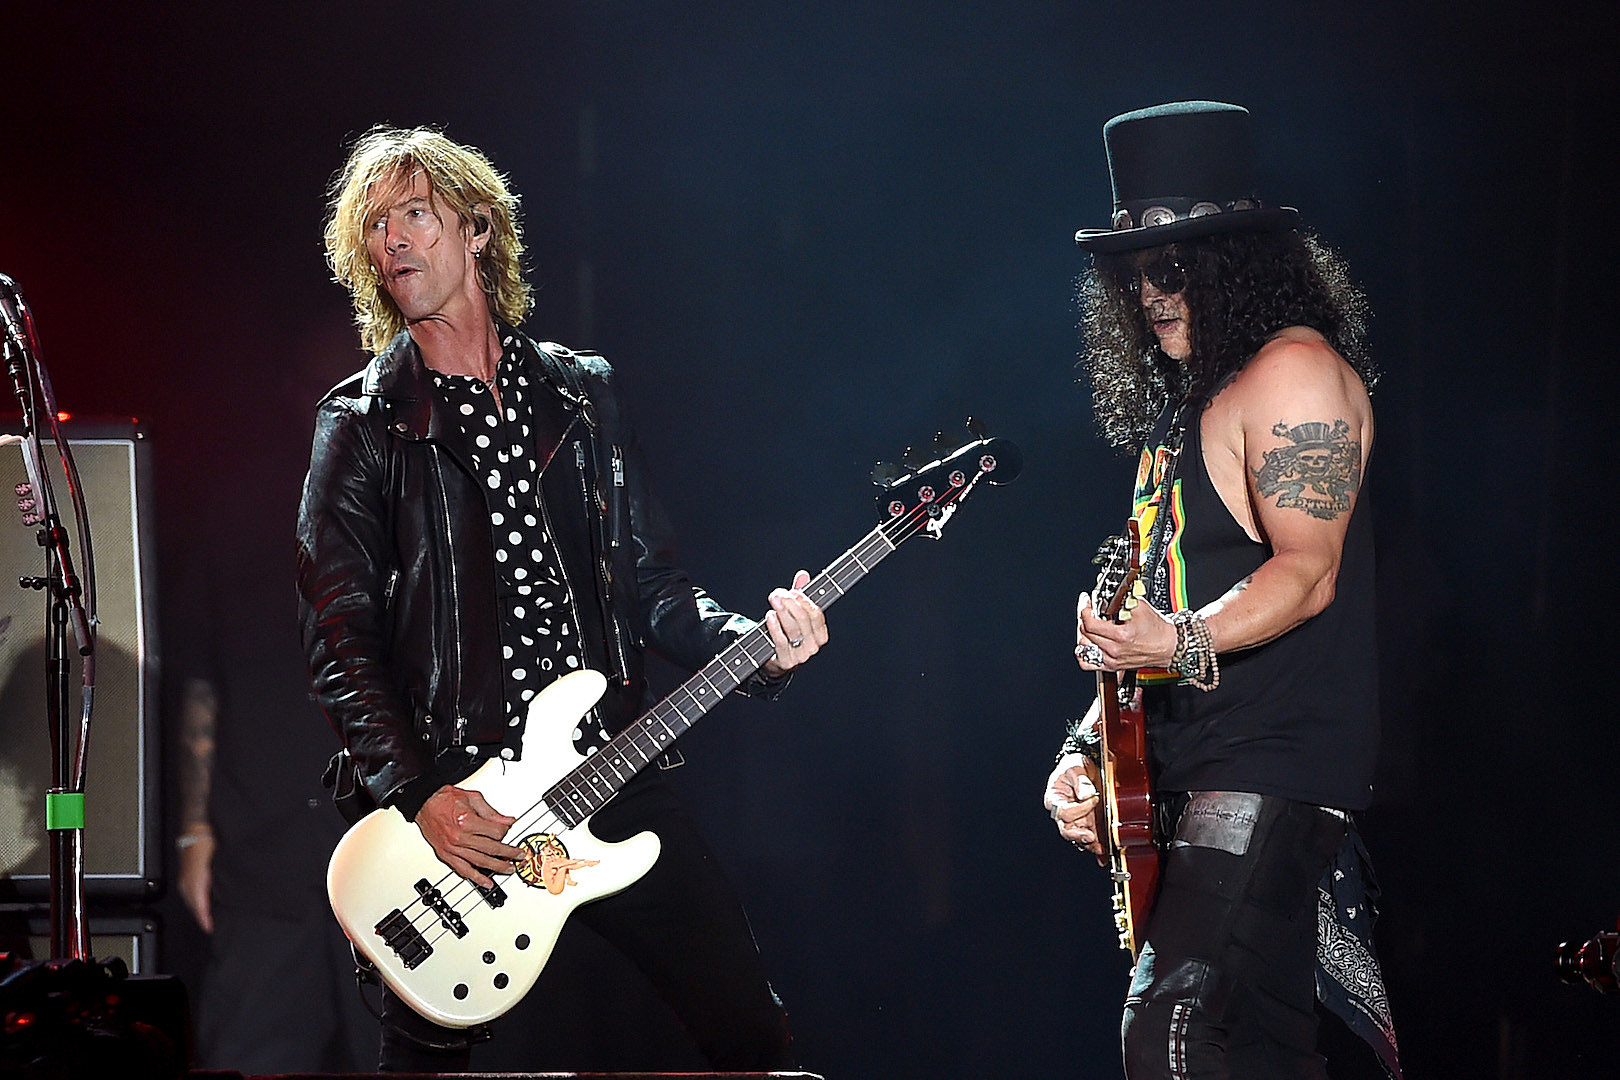 See Video of Guns N' Roses Rehearsing 'Hard School' Before Show